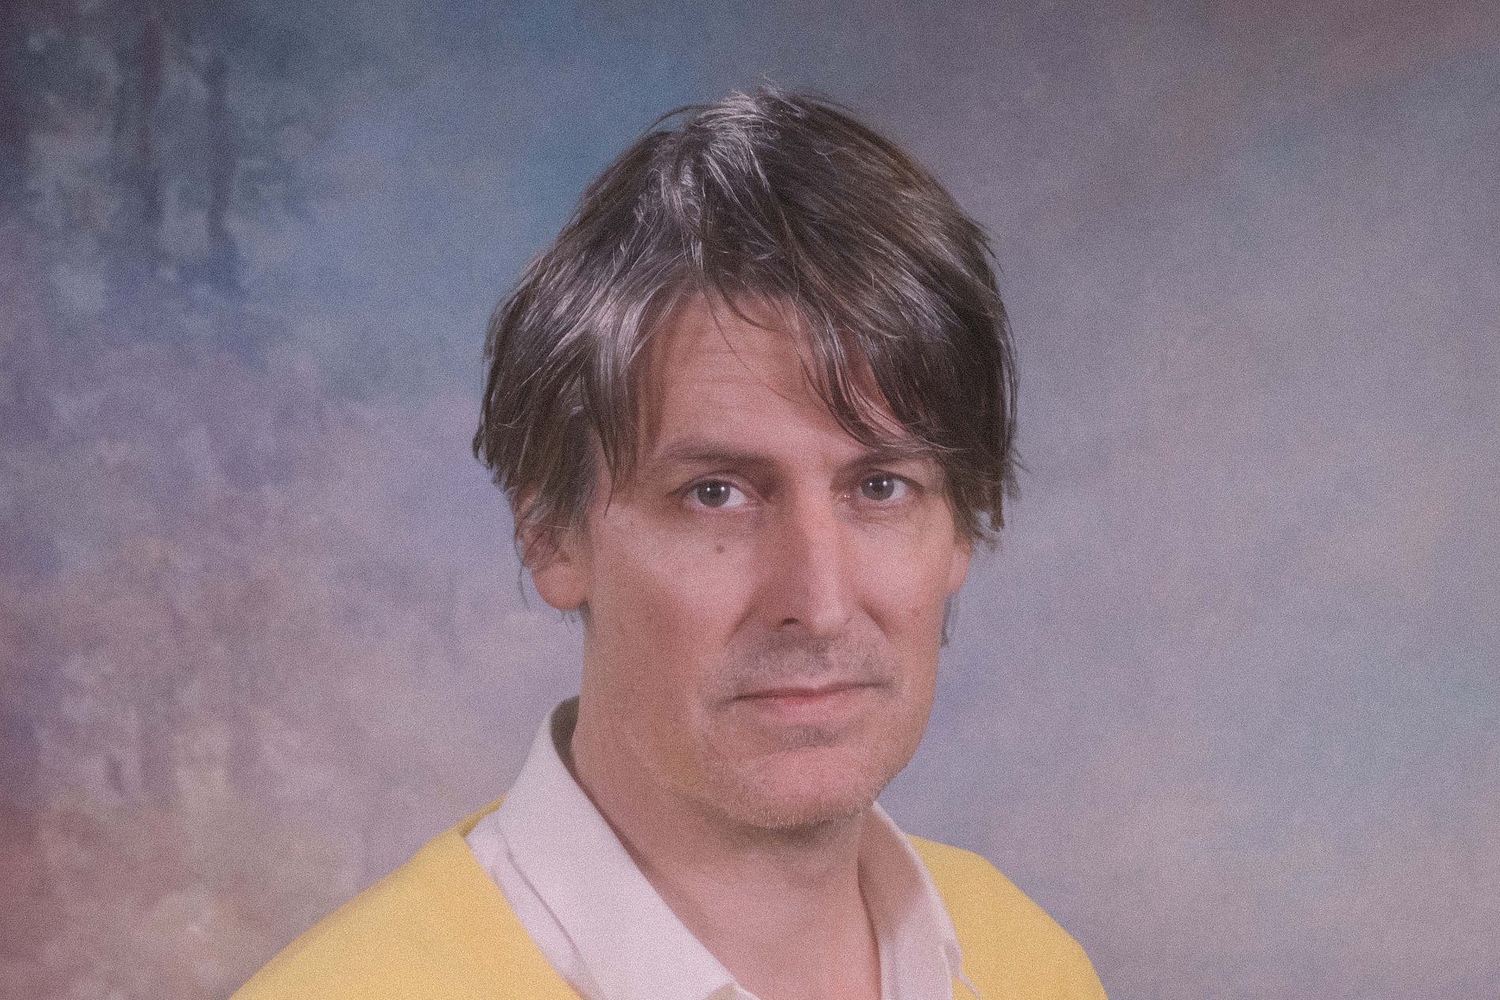 Stephen Malkmus shares new song ‘Come Get Me’